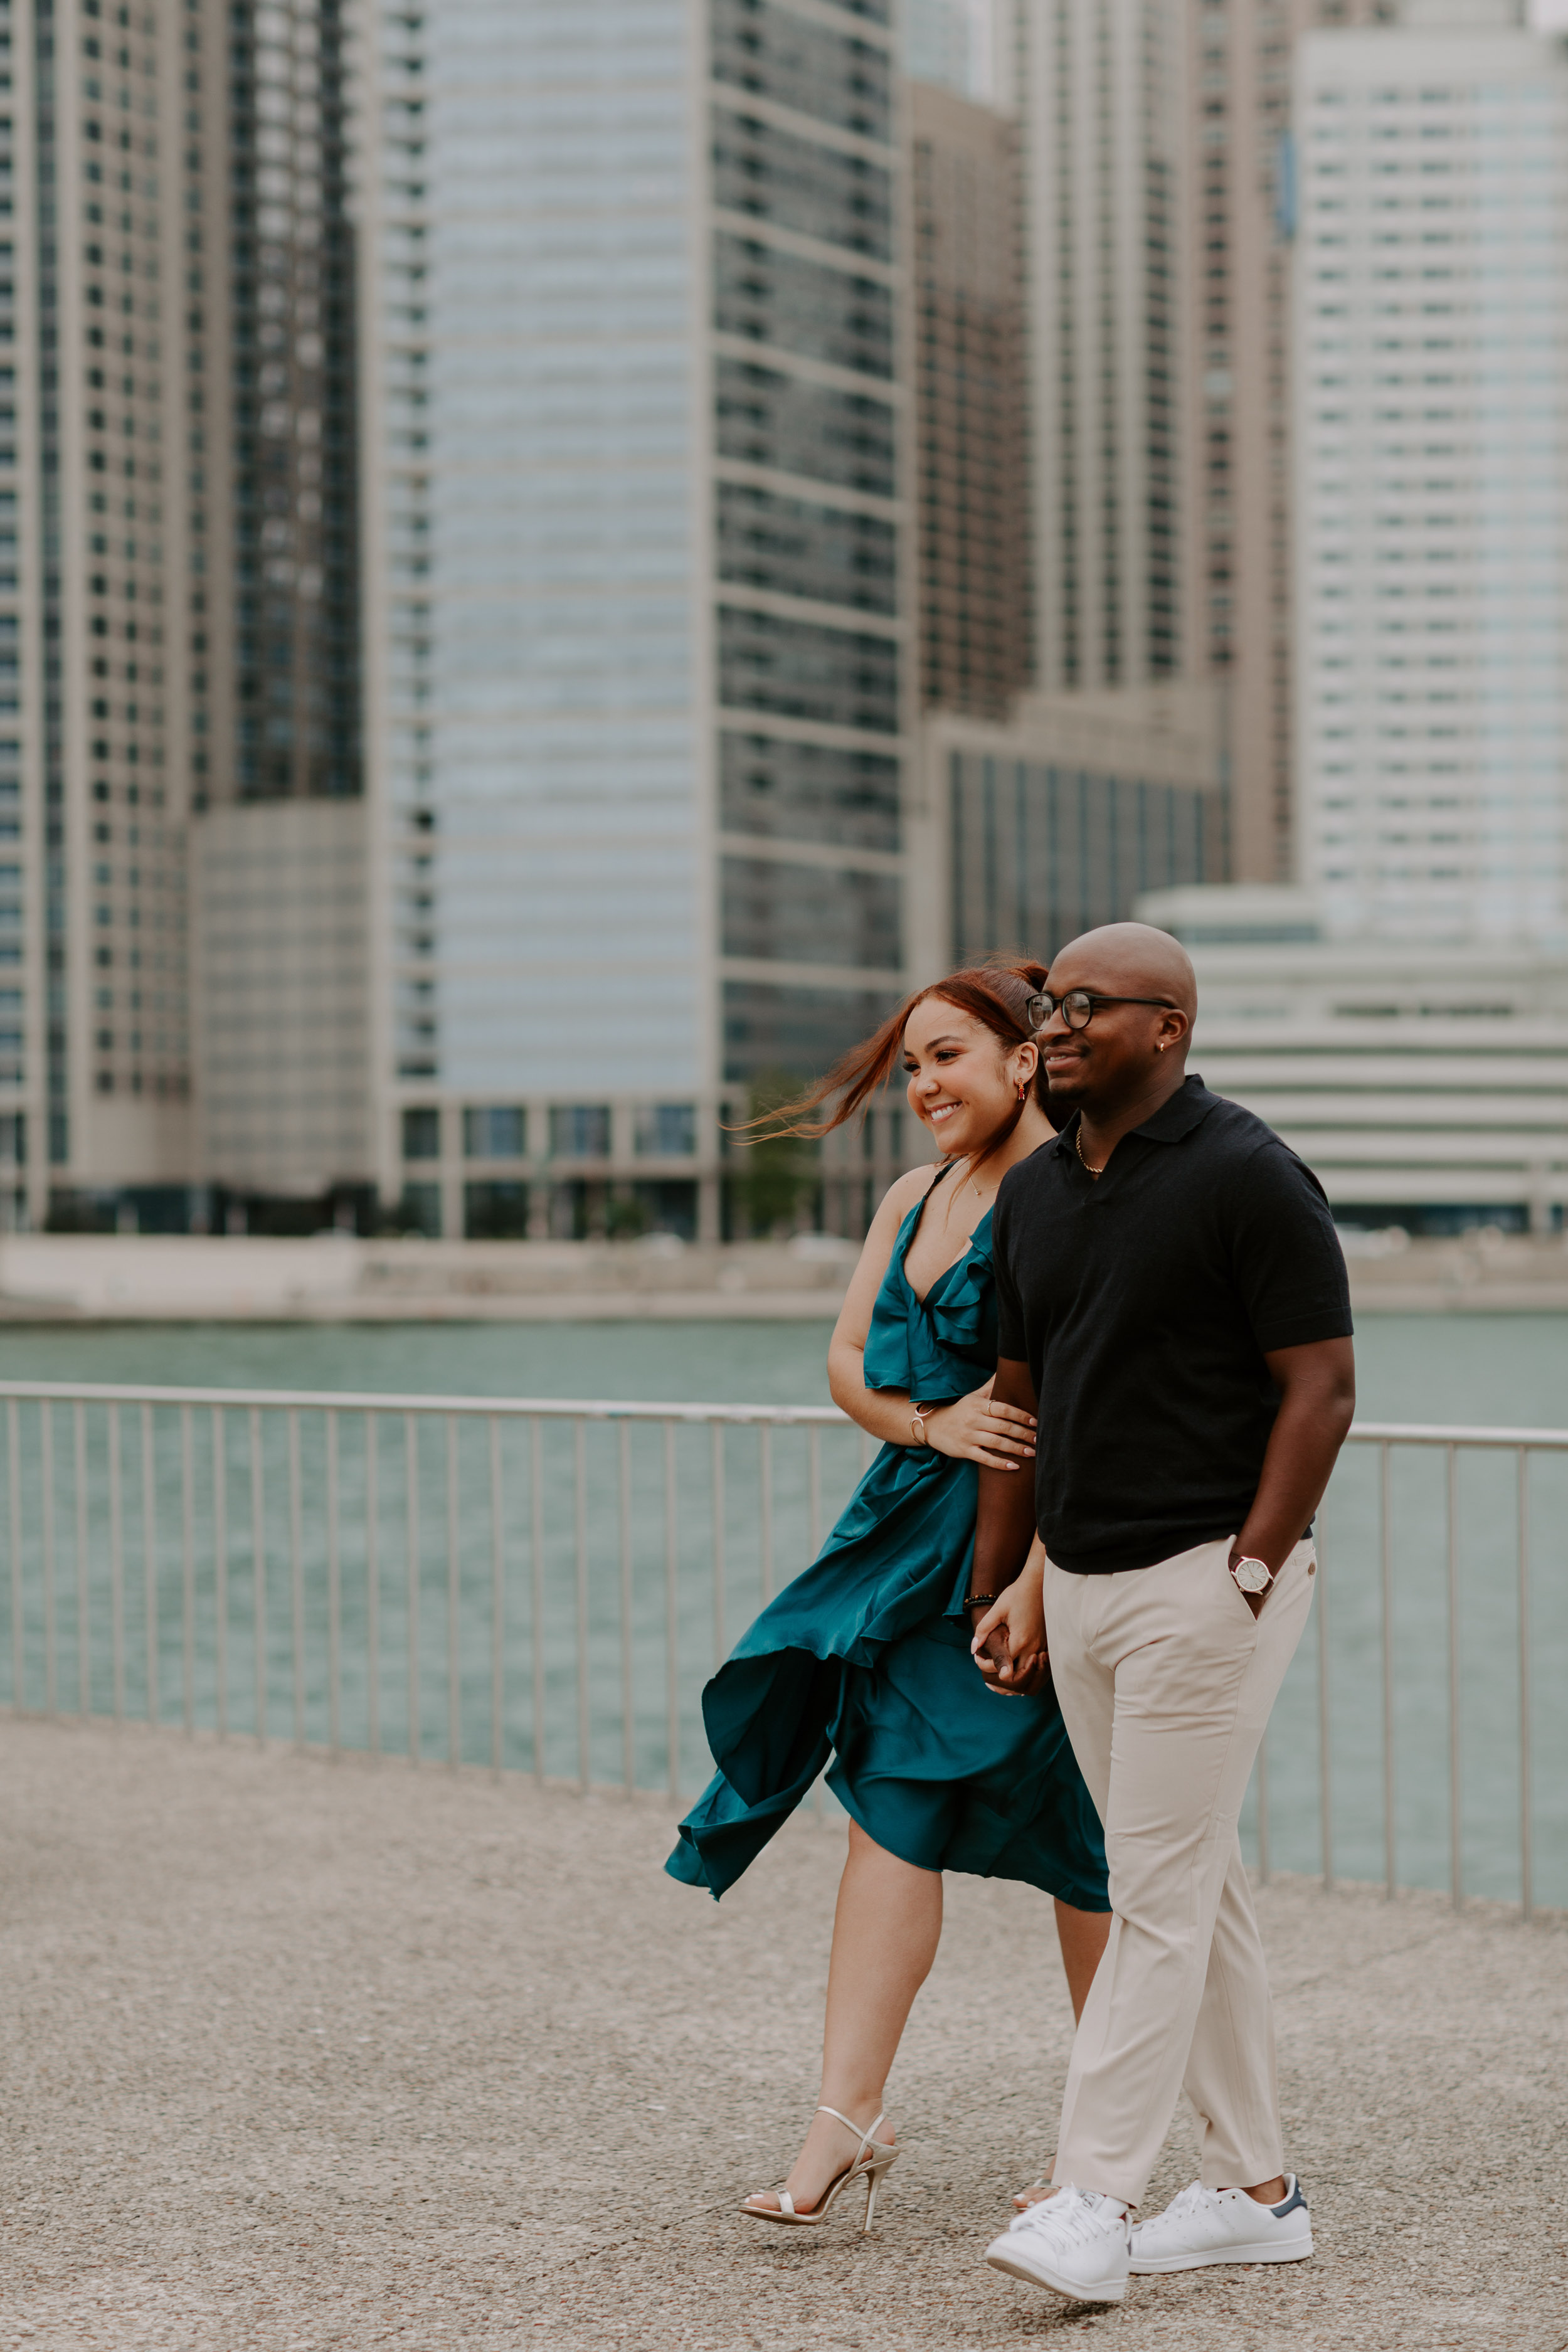 Engagement session at Olive Park & Ohio Street Beach